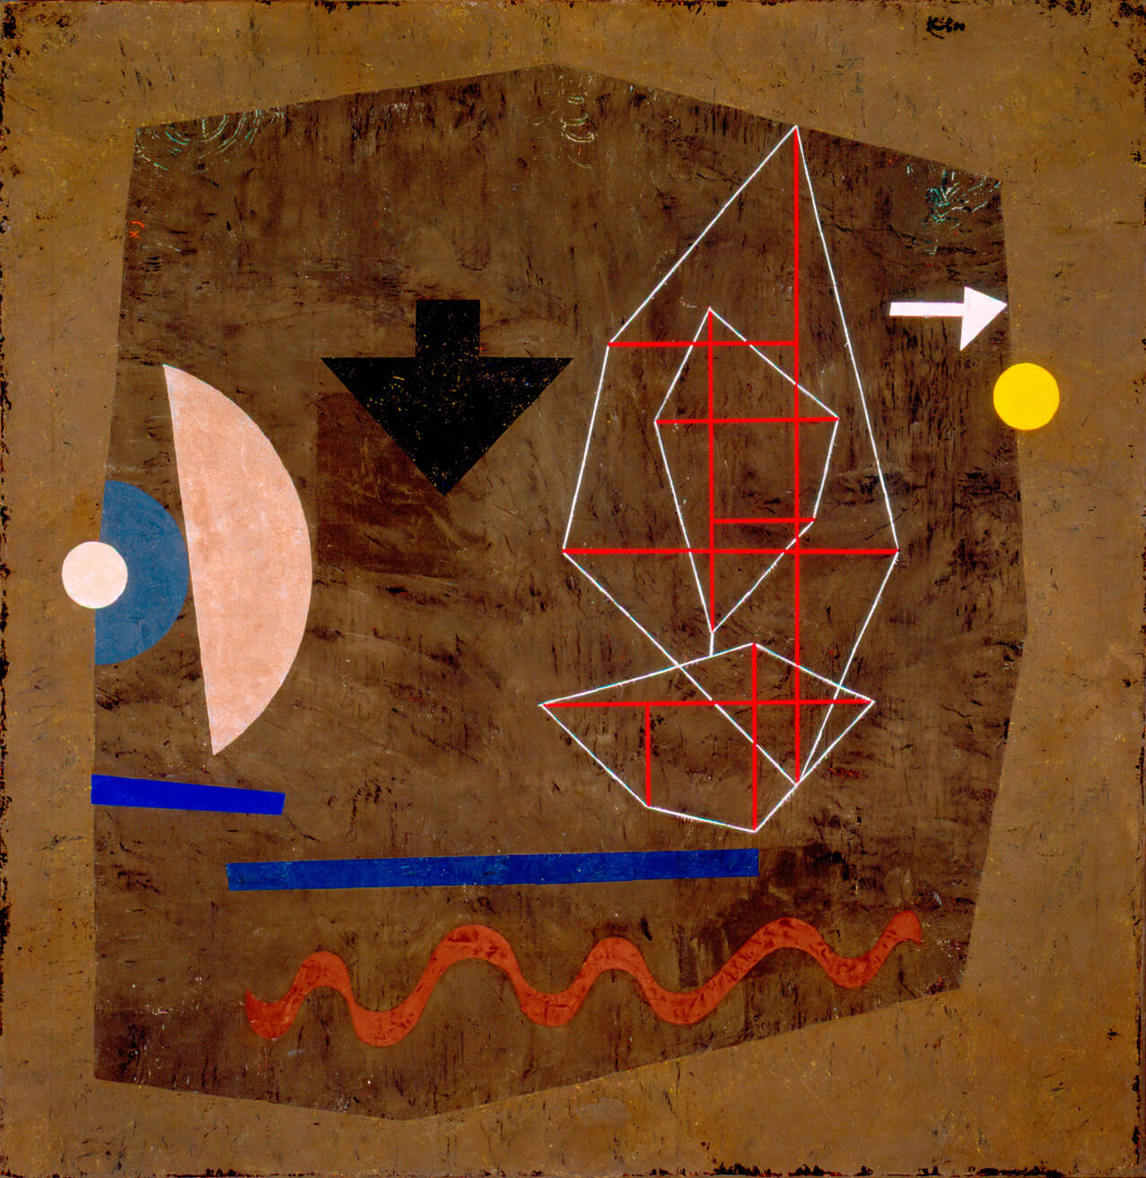 Possibilities at Sea, 1932, by Paul Klee